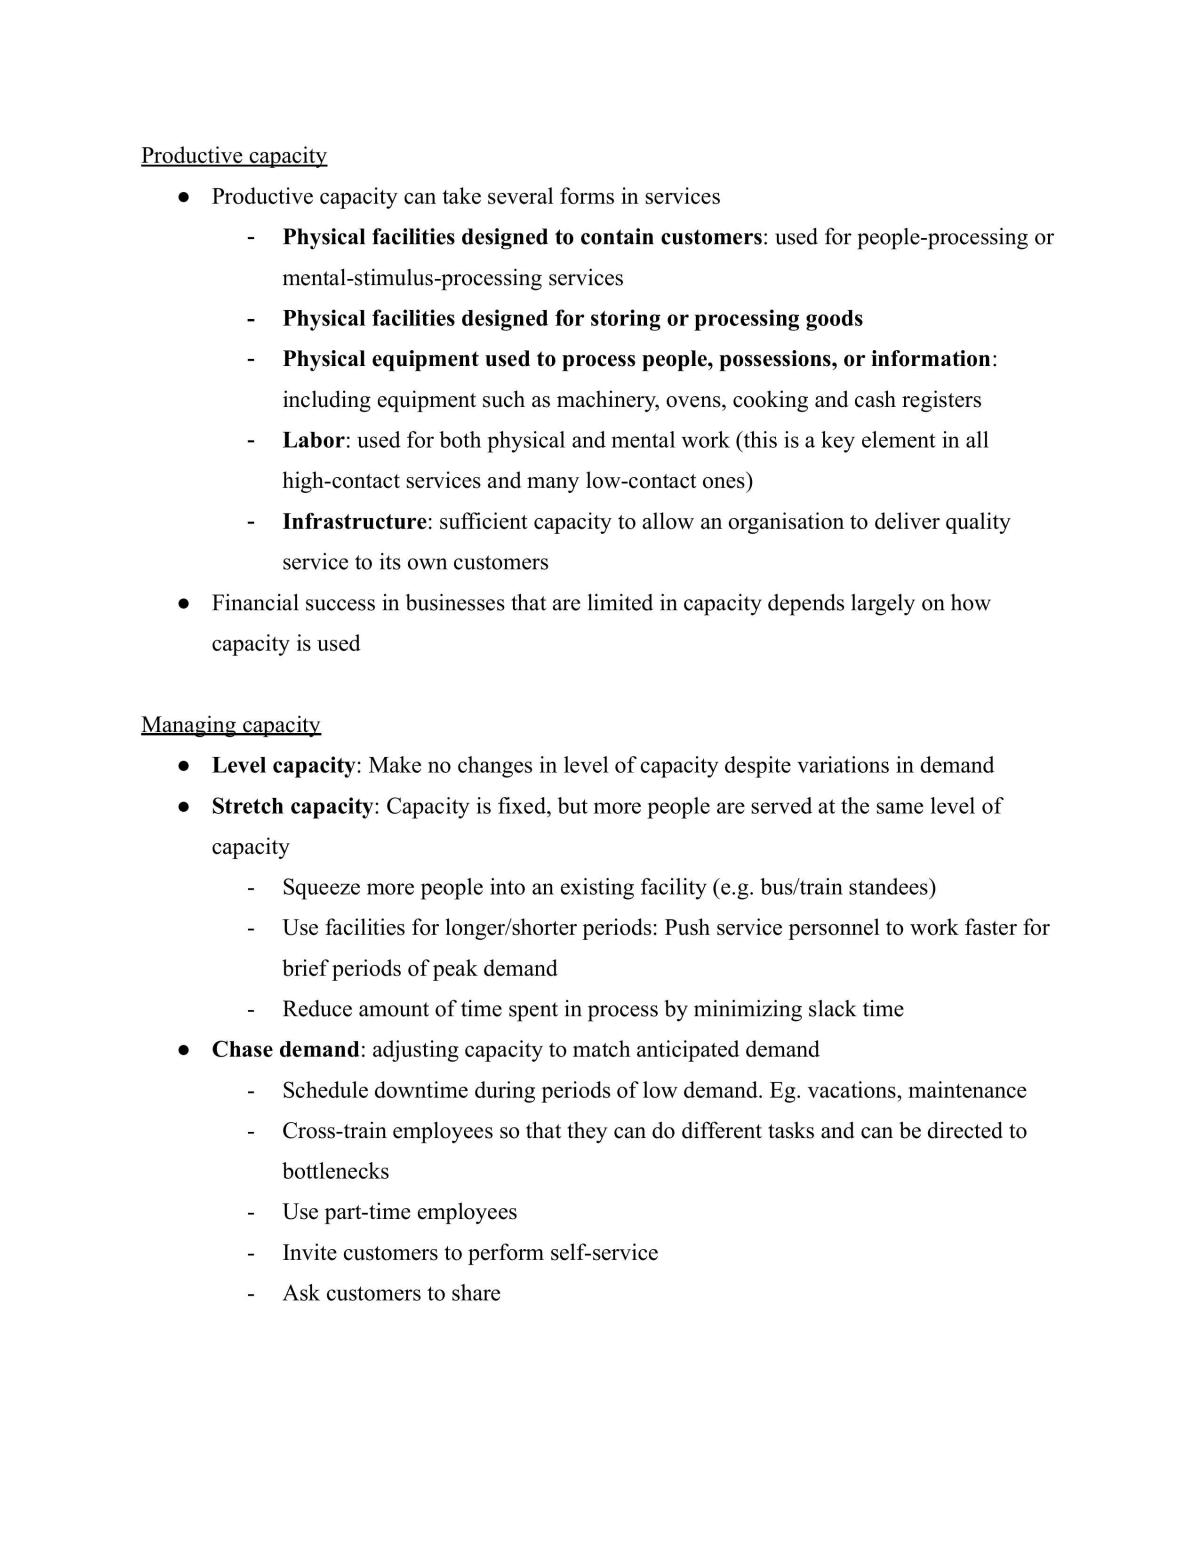 MKT363 Notes - Page 16